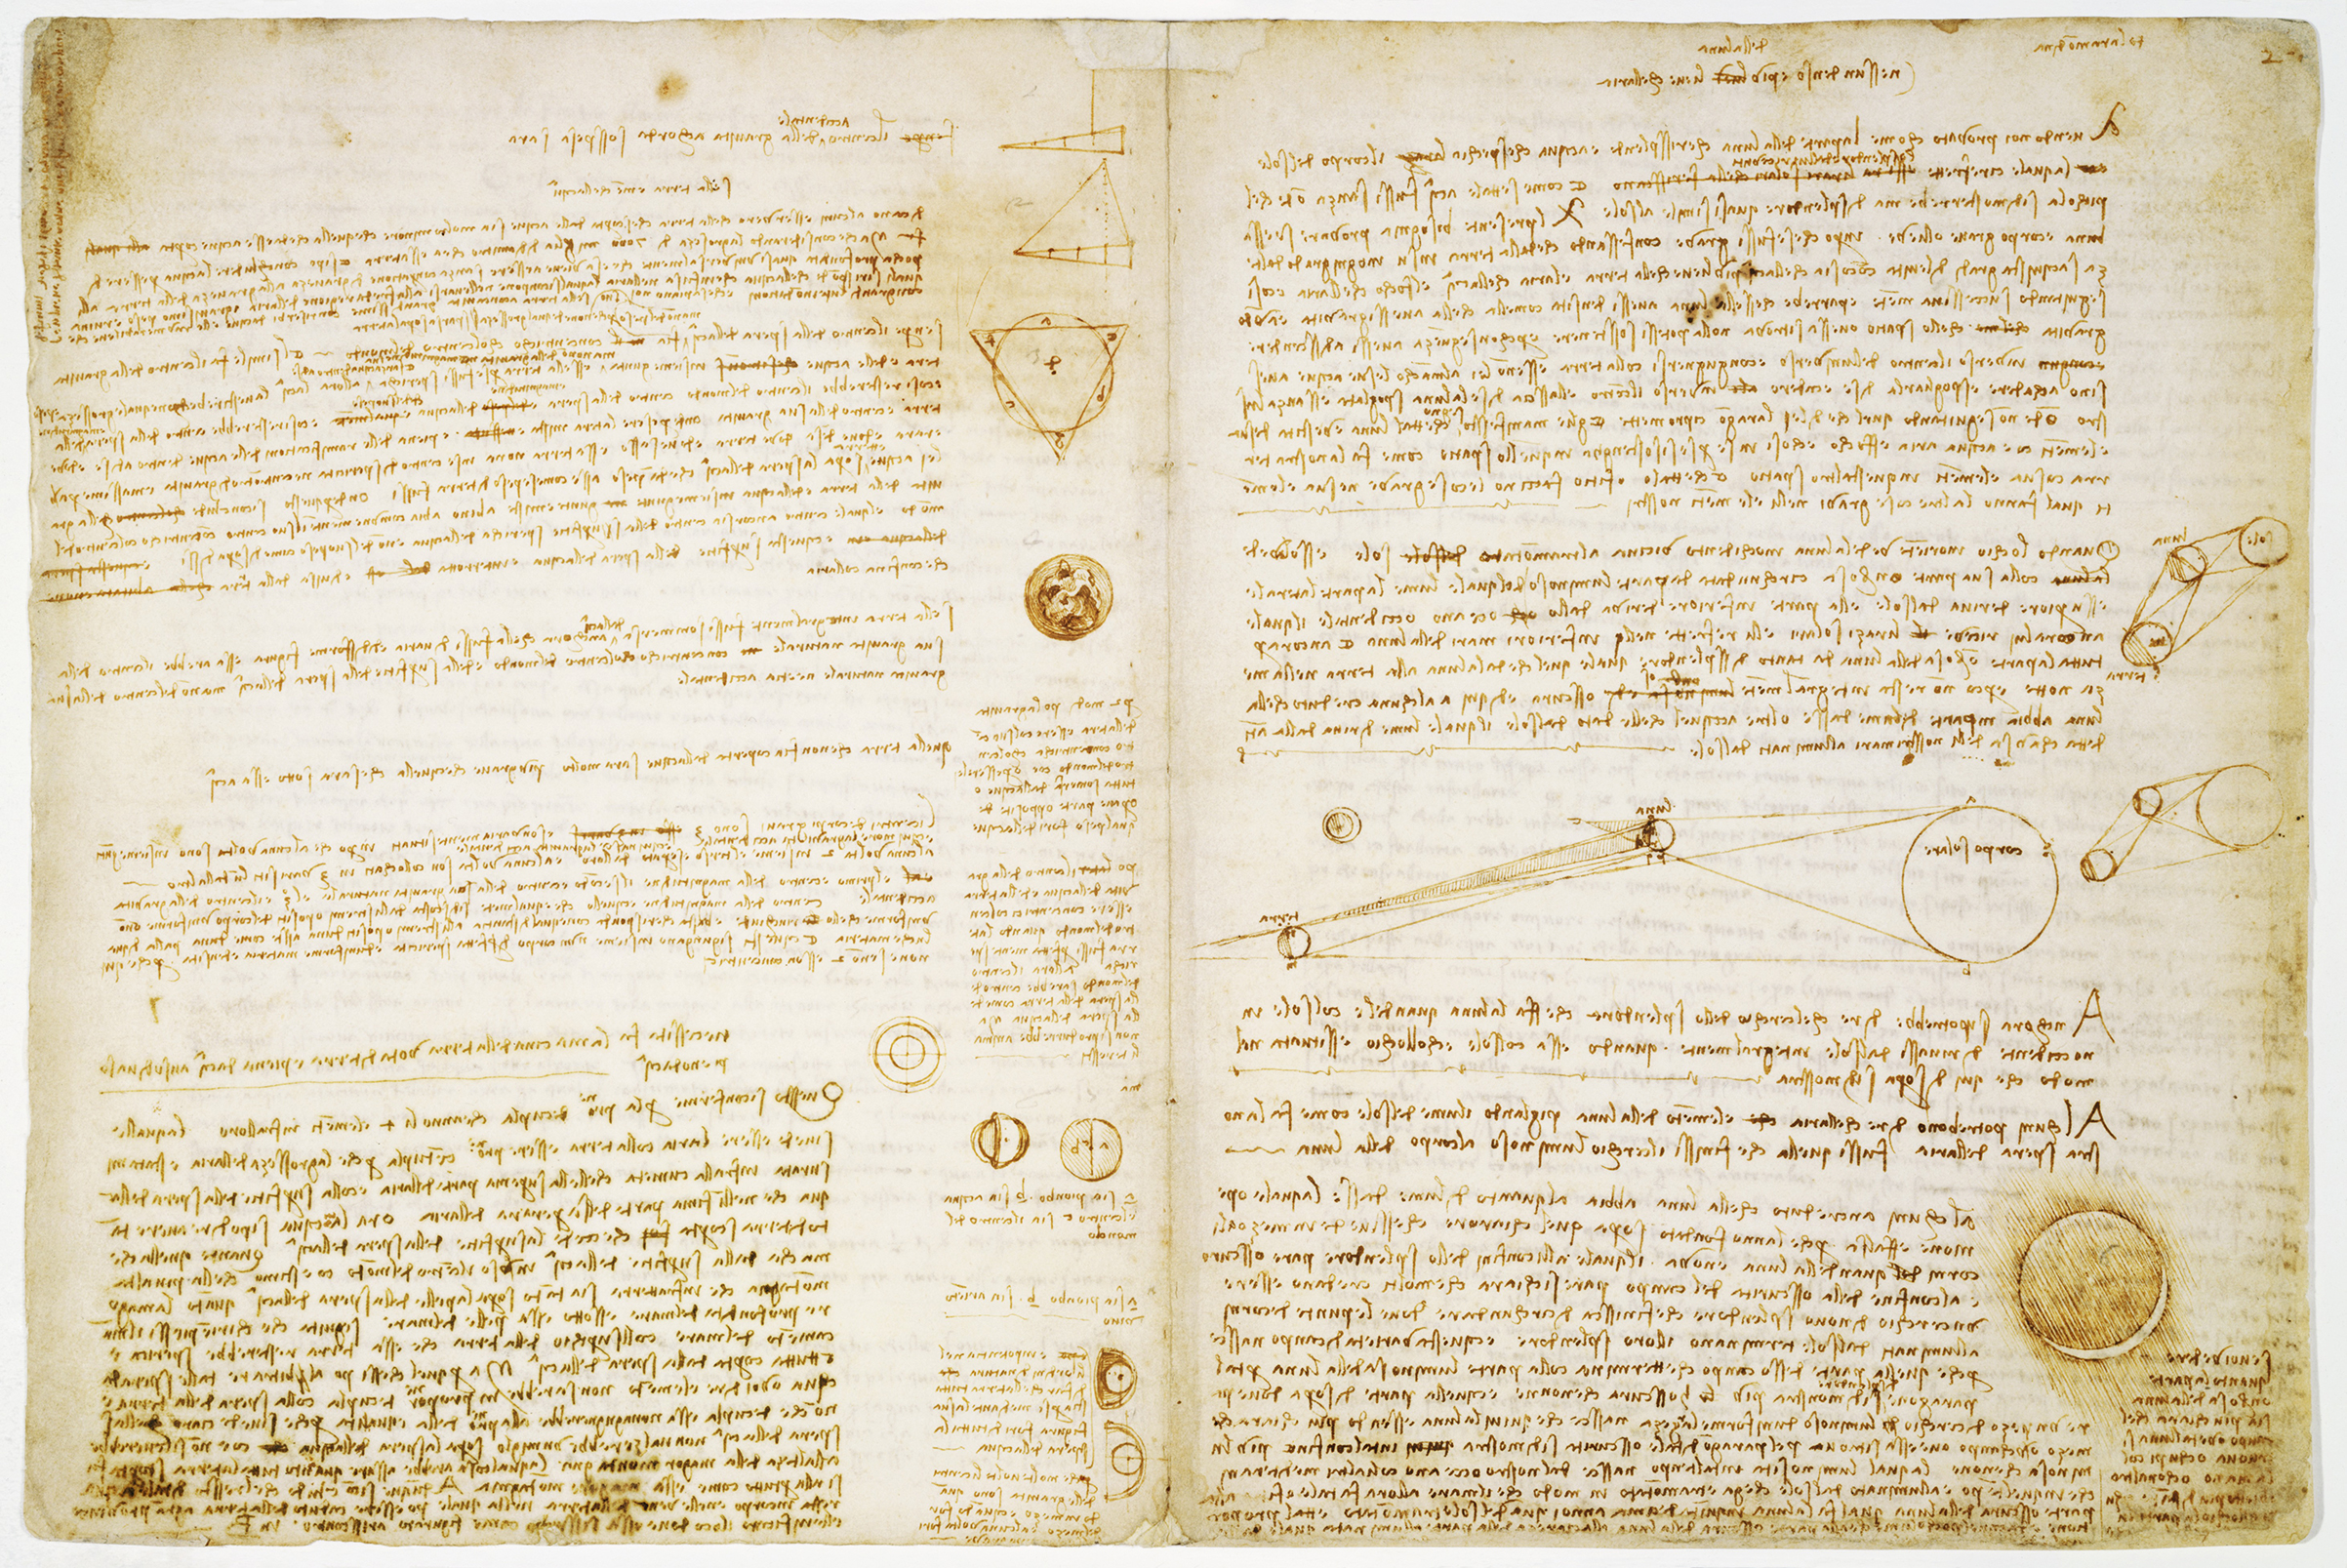 2019 marks the 500th anniversary of Leonardo’s death. To help celebrate the occasion, the Codex Leicester will be on display in several European museums (Seth Joel—Corbis/VCG/Getty Images)